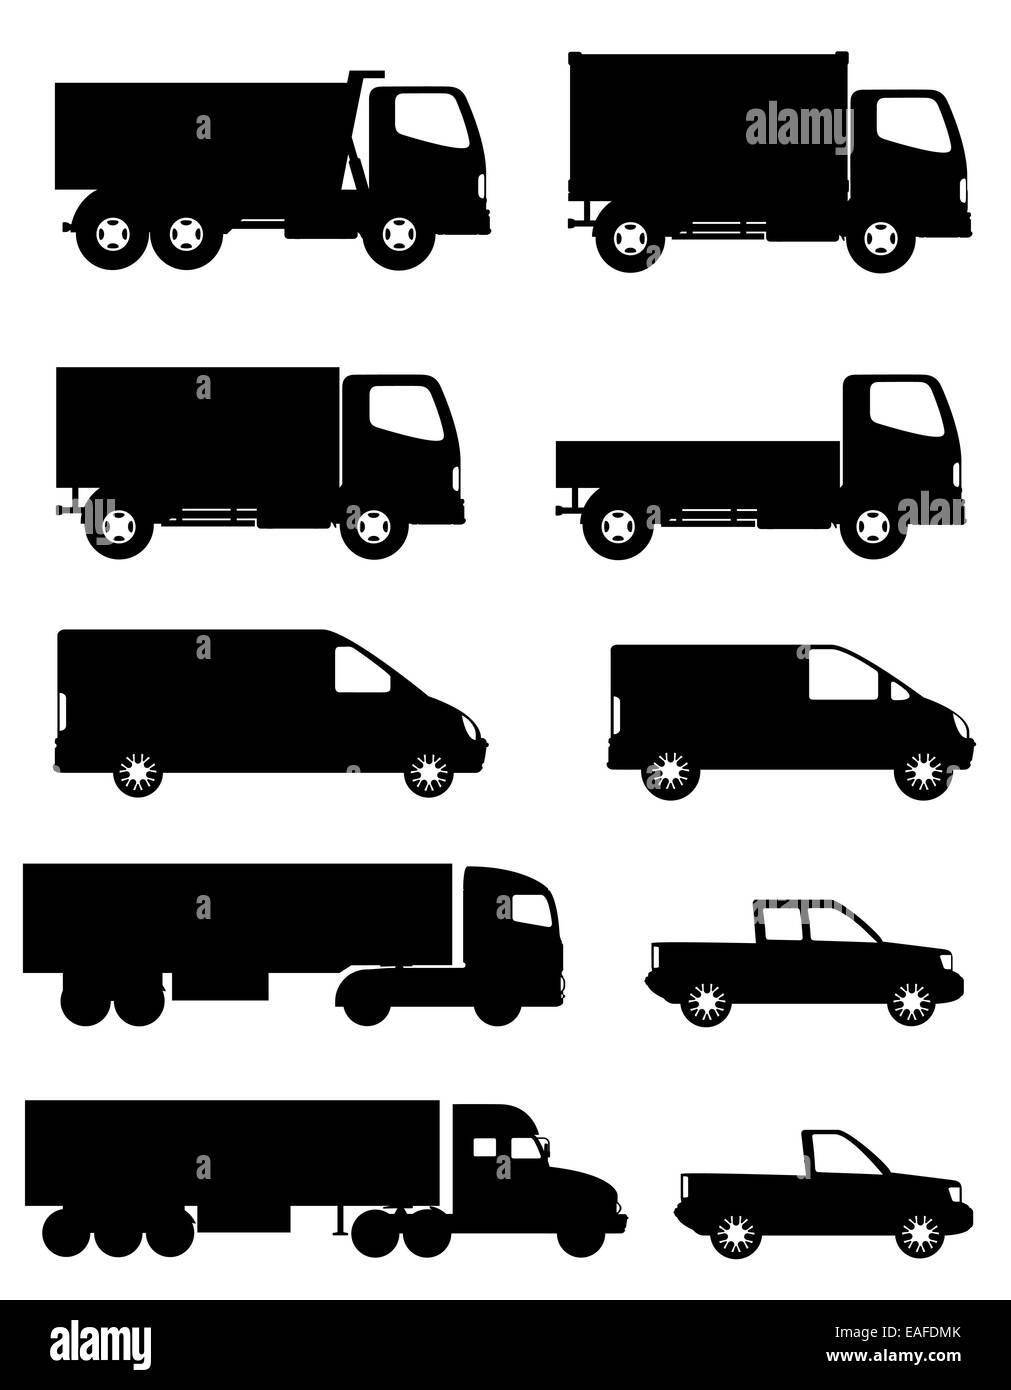 set of icons cars and truck for transportation cargo black silhouette illustration isolated on white background Stock Photo